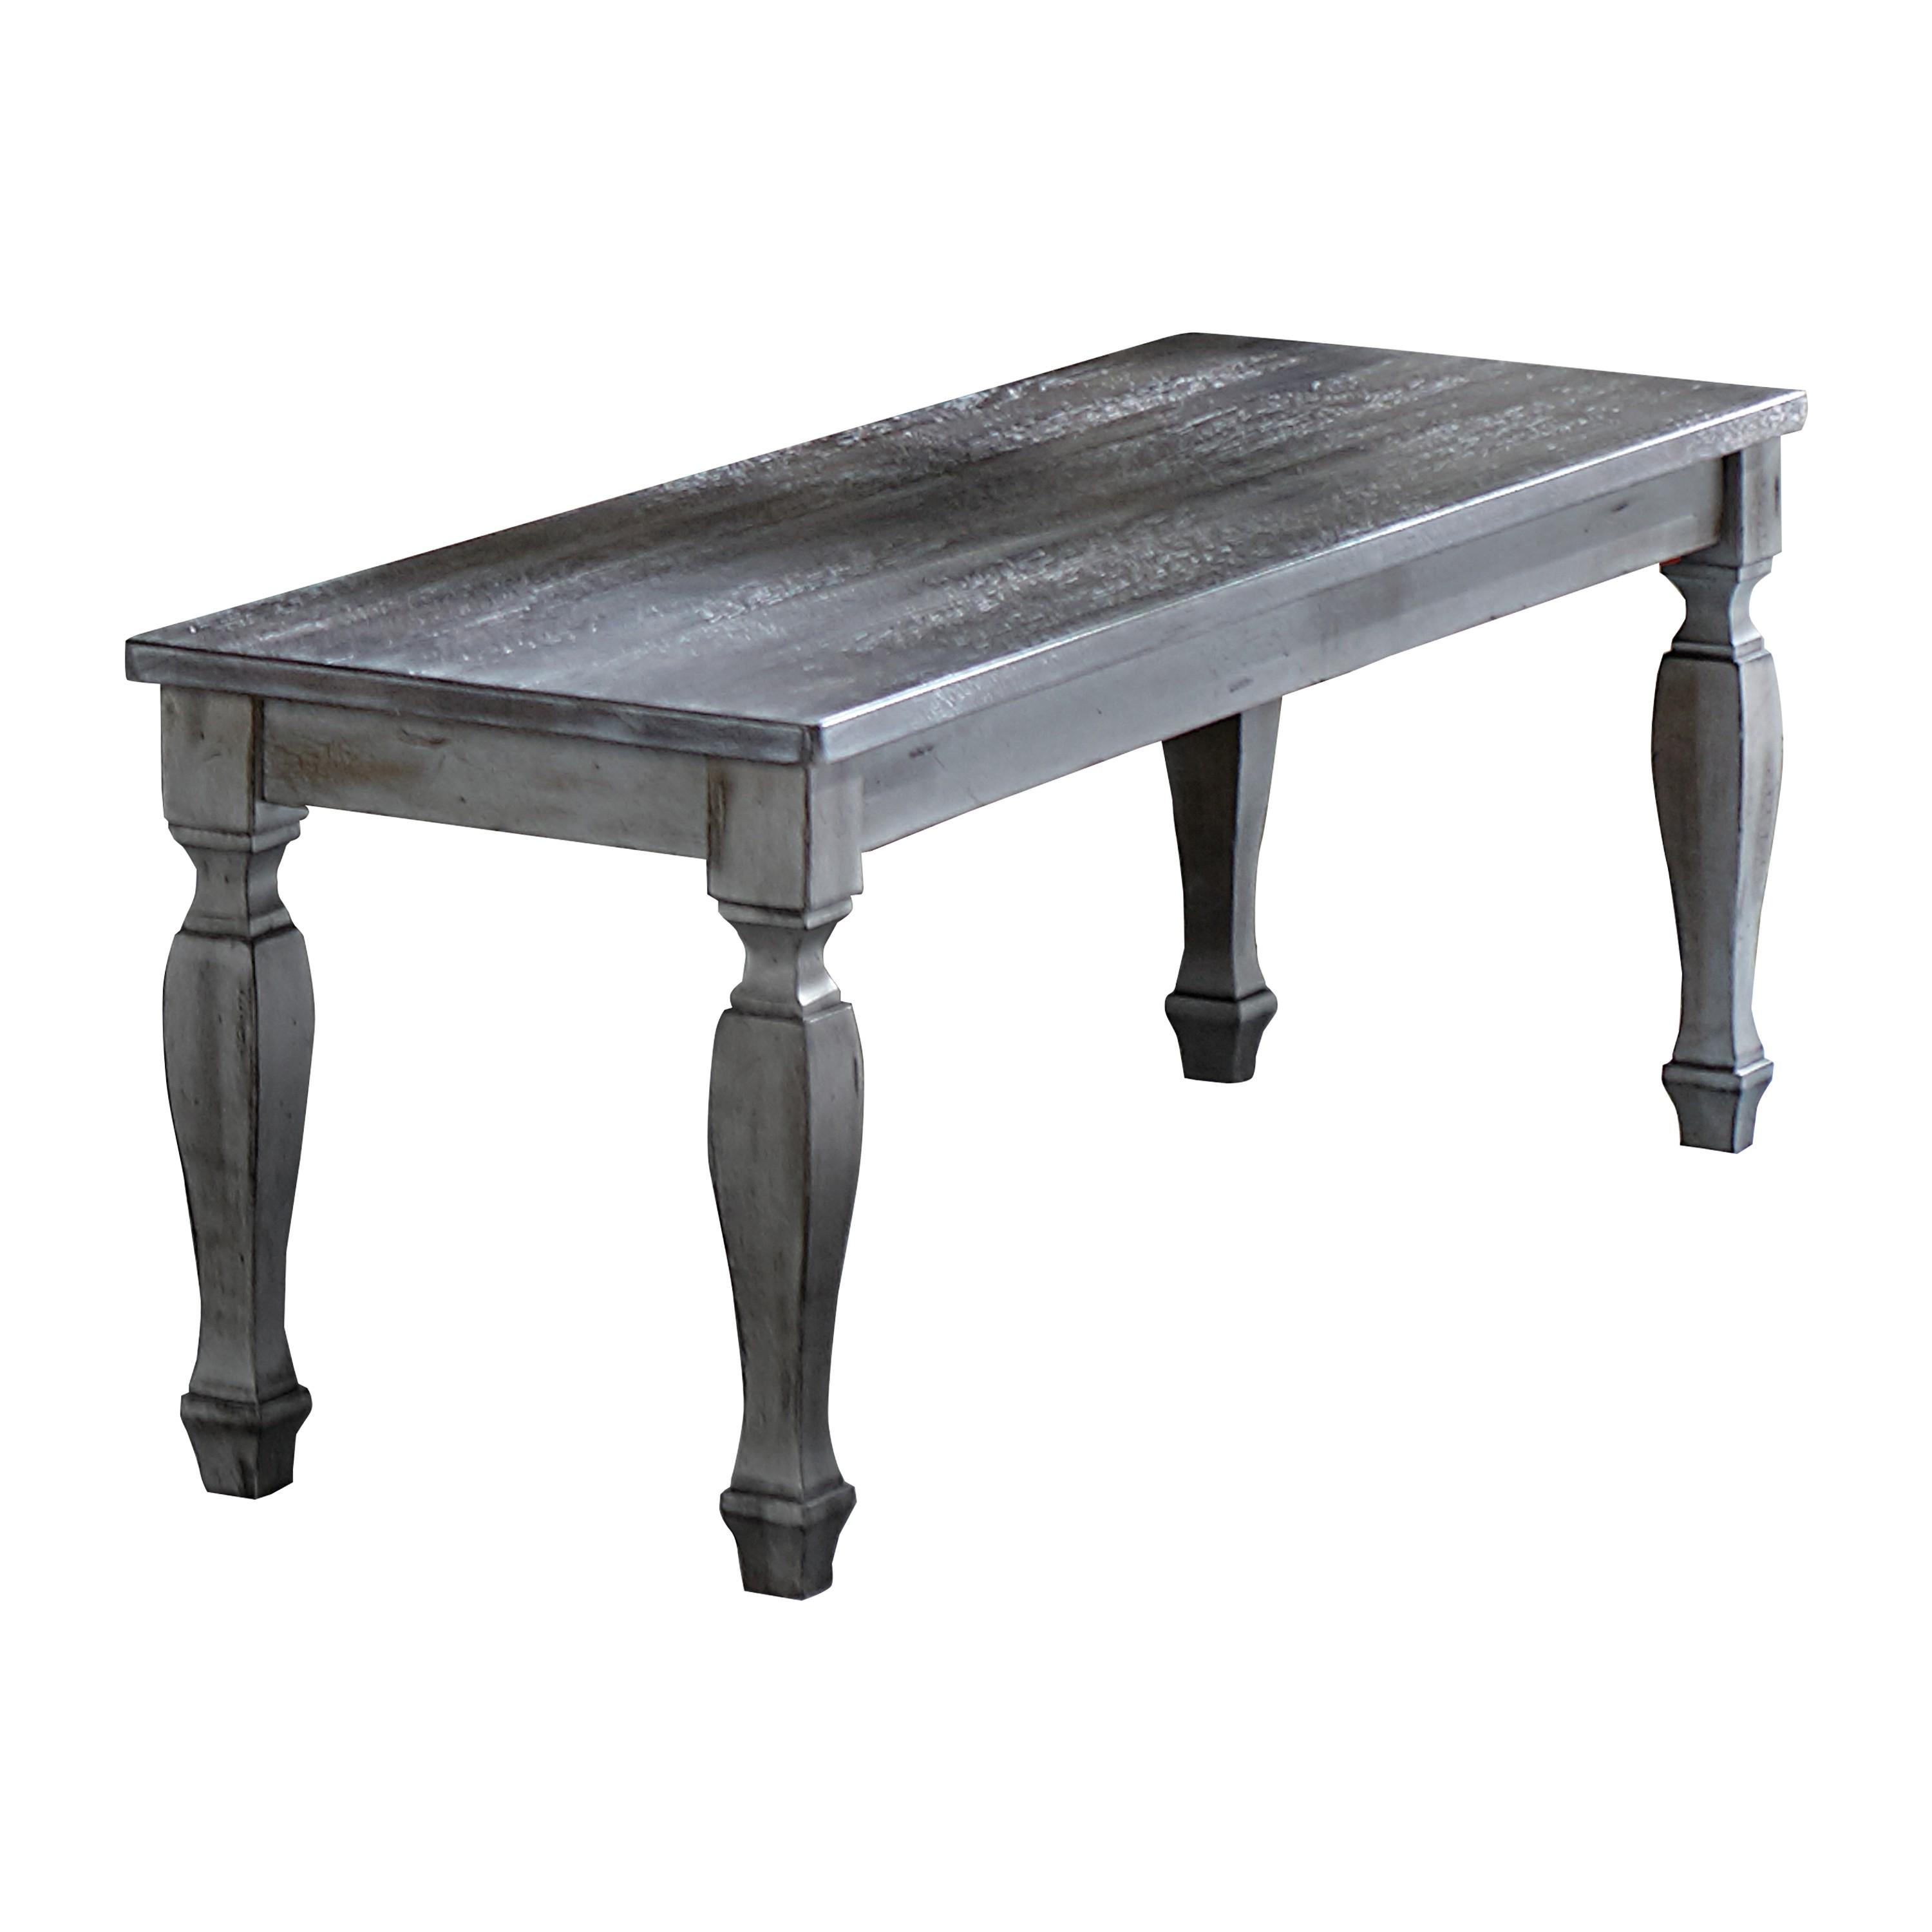 Traditional Bench 5520-13 Fulbright 5520-13 in Gray 